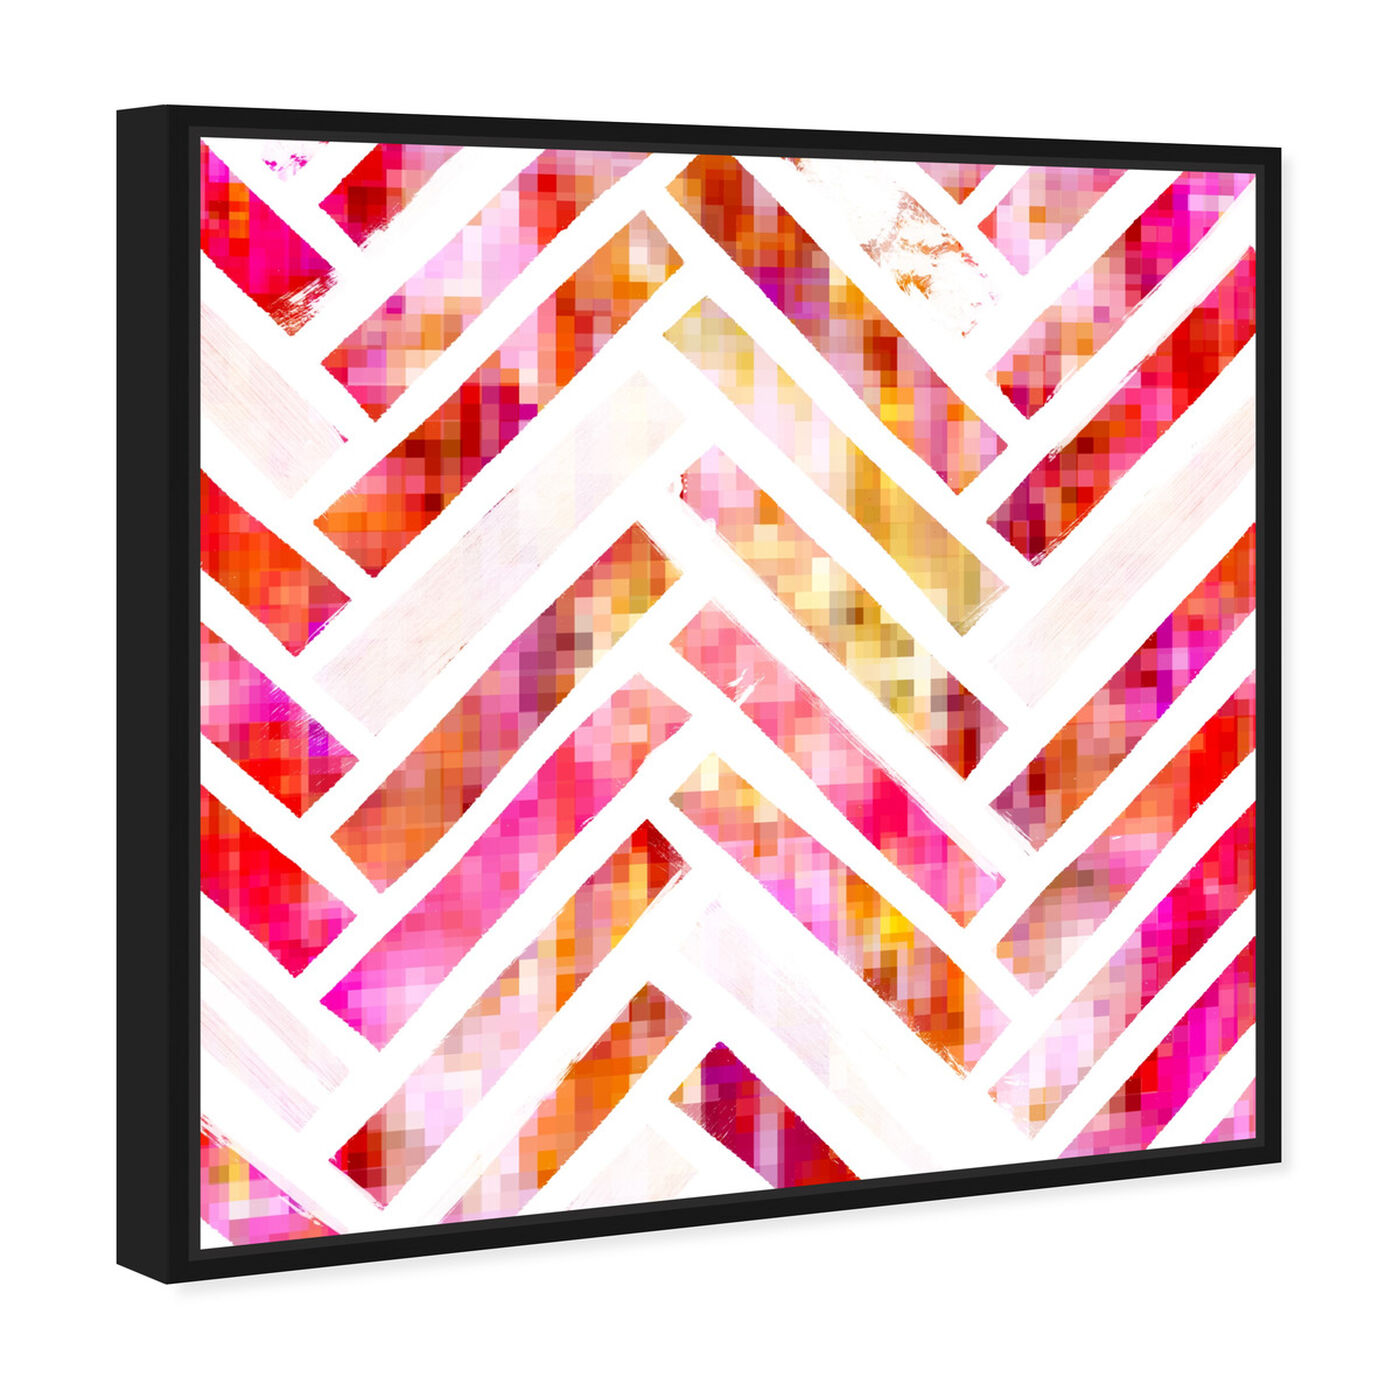 Angled view of Sugar Flake Herringbone featuring abstract and patterns art.